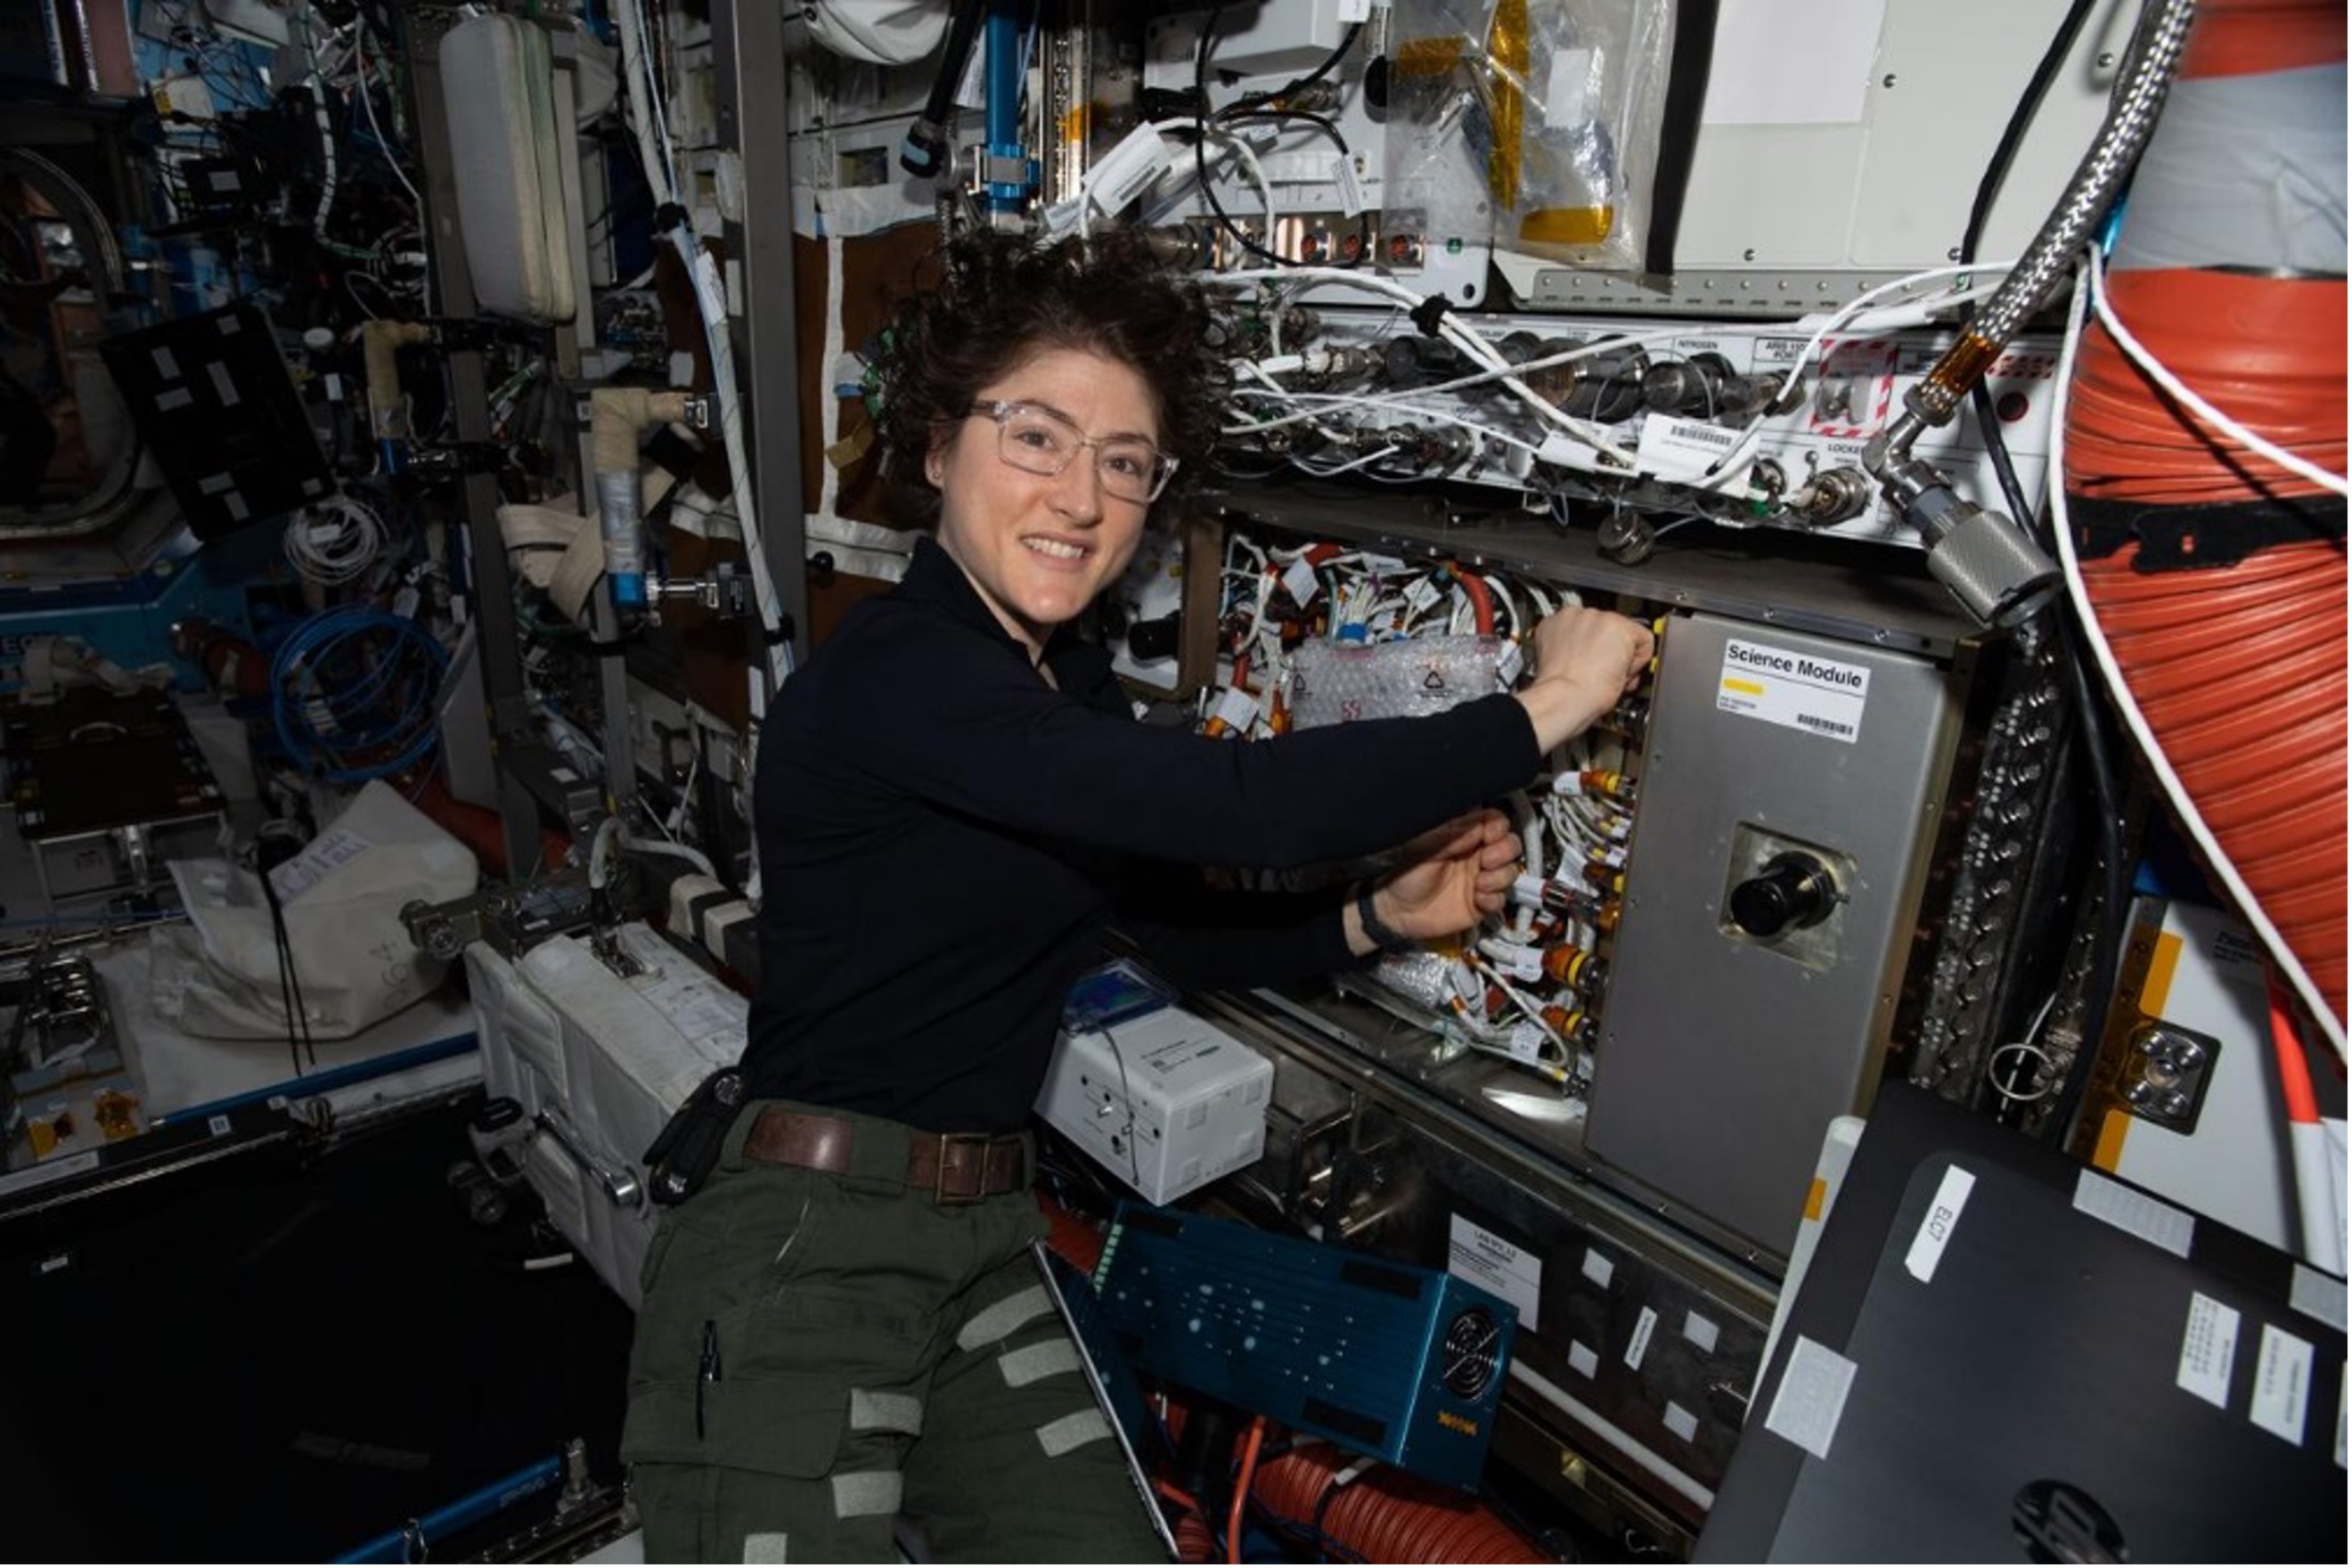 A photo of astronaut Christina Kock wearing glasses onboard the International Space Station as she works on hardware for the Cold Atom Lab.